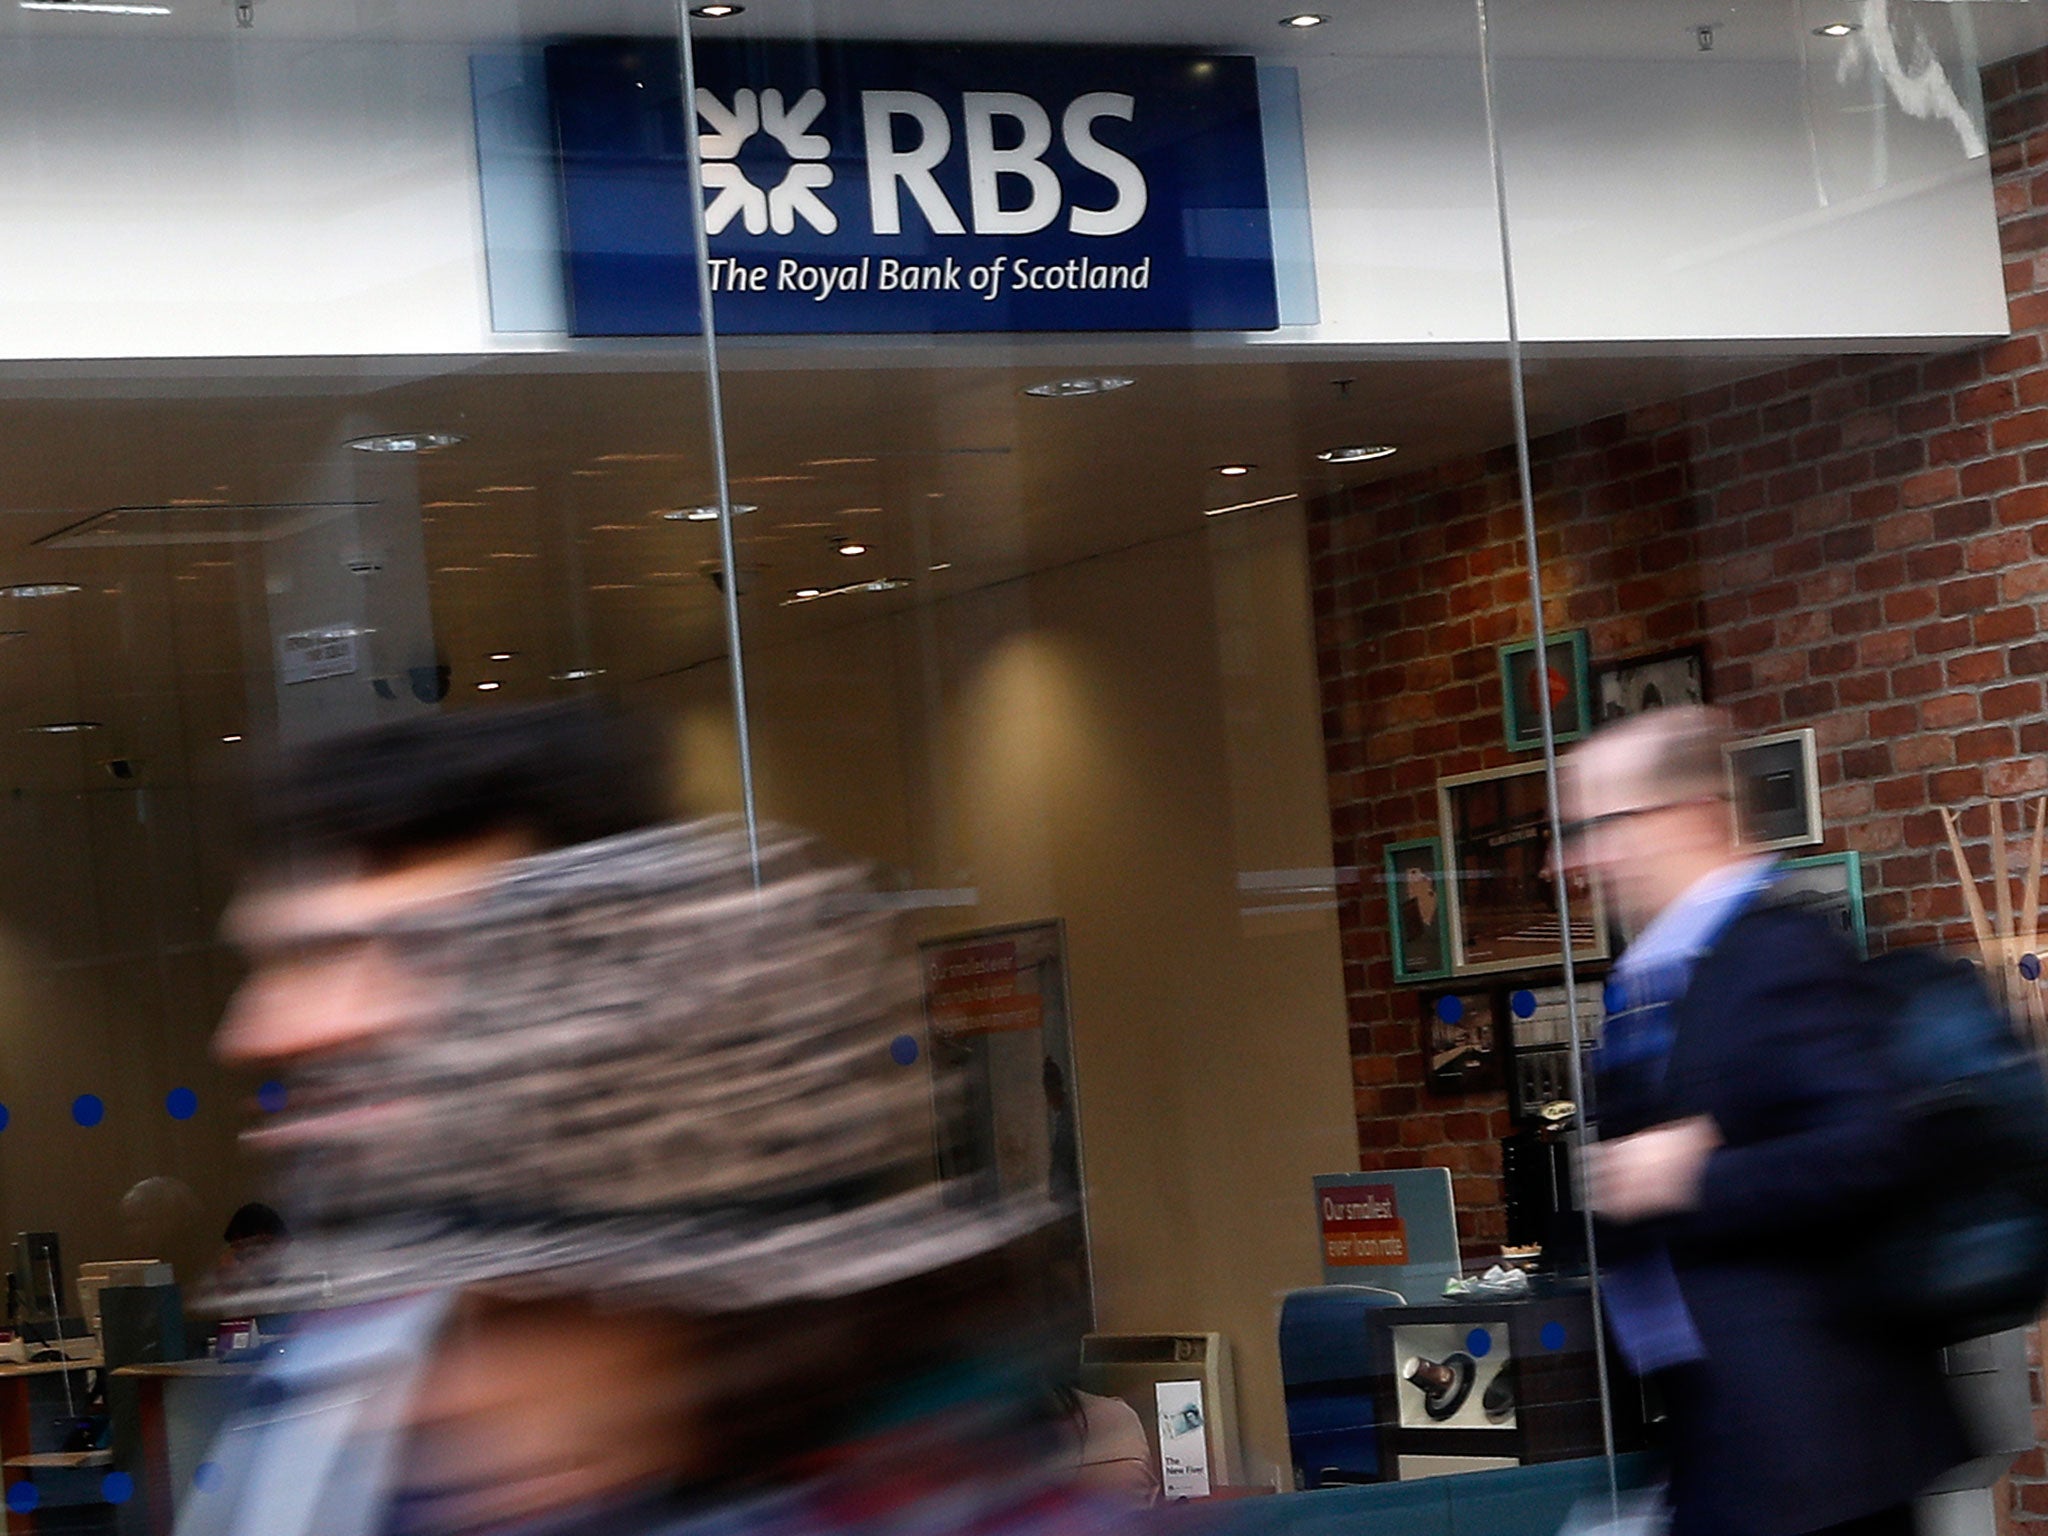 Next to events in Italy, RBS's need for capital is a sideshow